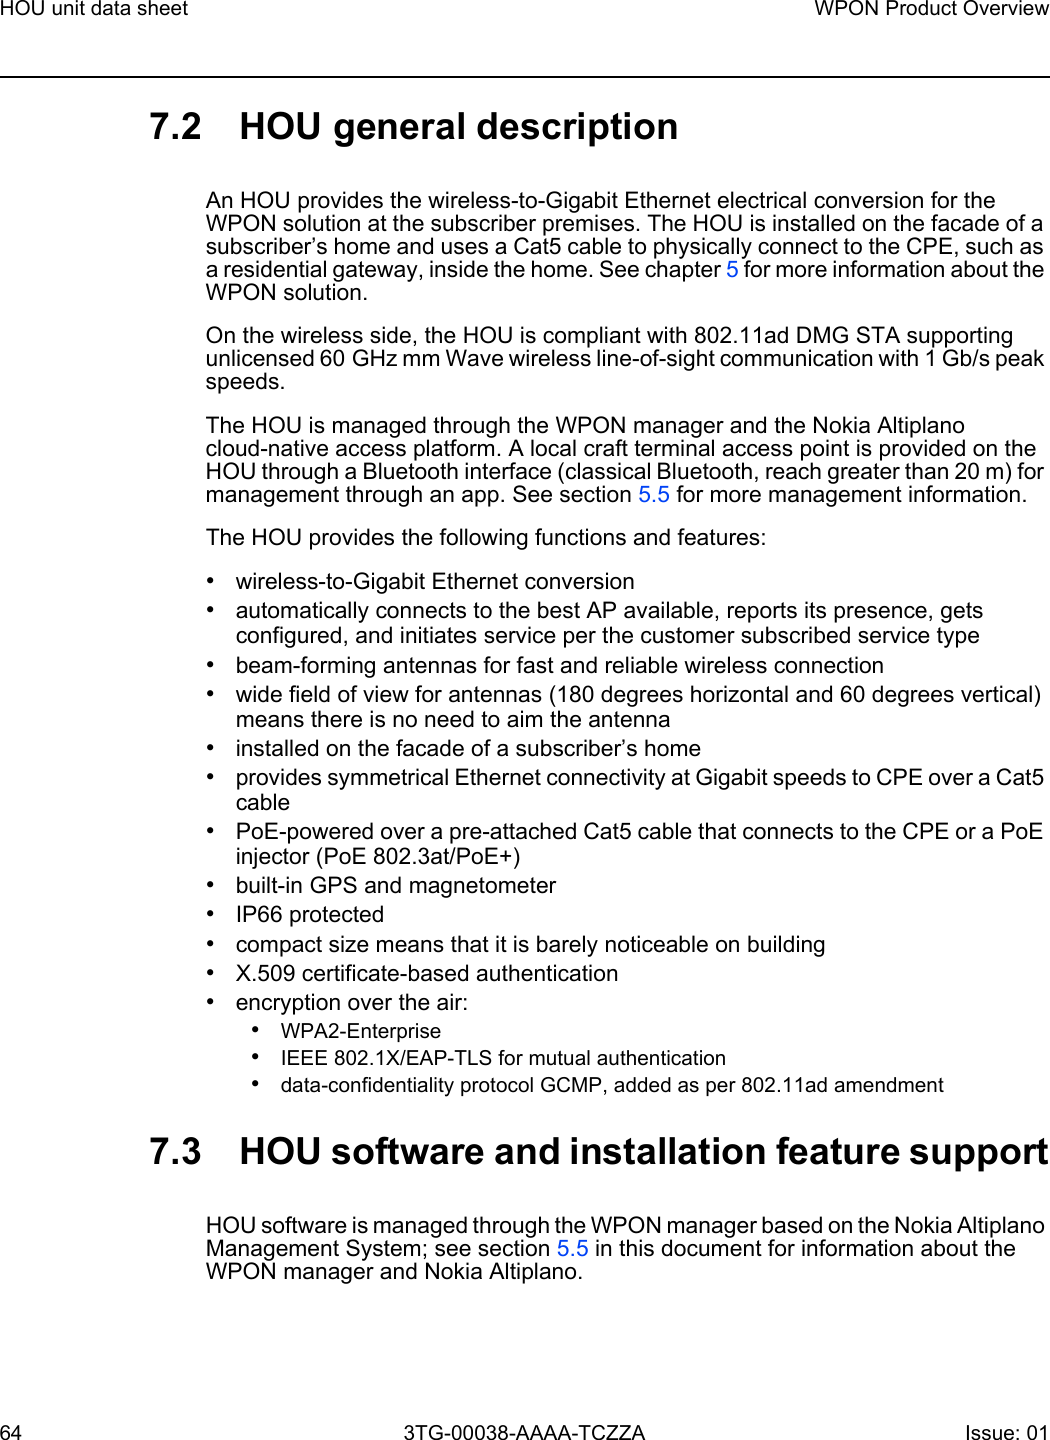 HOU unit data sheet64WPON Product Overview3TG-00038-AAAA-TCZZA Issue: 01 7.2 HOU general descriptionAn HOU provides the wireless-to-Gigabit Ethernet electrical conversion for the WPON solution at the subscriber premises. The HOU is installed on the facade of a subscriber’s home and uses a Cat5 cable to physically connect to the CPE, such as a residential gateway, inside the home. See chapter 5 for more information about the WPON solution.On the wireless side, the HOU is compliant with 802.11ad DMG STA supporting unlicensed 60 GHz mm Wave wireless line-of-sight communication with 1 Gb/s peak speeds.The HOU is managed through the WPON manager and the Nokia Altiplano cloud-native access platform. A local craft terminal access point is provided on the HOU through a Bluetooth interface (classical Bluetooth, reach greater than 20 m) for management through an app. See section 5.5 for more management information. The HOU provides the following functions and features:•wireless-to-Gigabit Ethernet conversion•automatically connects to the best AP available, reports its presence, gets configured, and initiates service per the customer subscribed service type•beam-forming antennas for fast and reliable wireless connection•wide field of view for antennas (180 degrees horizontal and 60 degrees vertical) means there is no need to aim the antenna•installed on the facade of a subscriber’s home •provides symmetrical Ethernet connectivity at Gigabit speeds to CPE over a Cat5 cable•PoE-powered over a pre-attached Cat5 cable that connects to the CPE or a PoE injector (PoE 802.3at/PoE+)•built-in GPS and magnetometer•IP66 protected•compact size means that it is barely noticeable on building•X.509 certificate-based authentication•encryption over the air:•WPA2-Enterprise•IEEE 802.1X/EAP-TLS for mutual authentication•data-confidentiality protocol GCMP, added as per 802.11ad amendment7.3 HOU software and installation feature supportHOU software is managed through the WPON manager based on the Nokia Altiplano Management System; see section 5.5 in this document for information about the WPON manager and Nokia Altiplano.